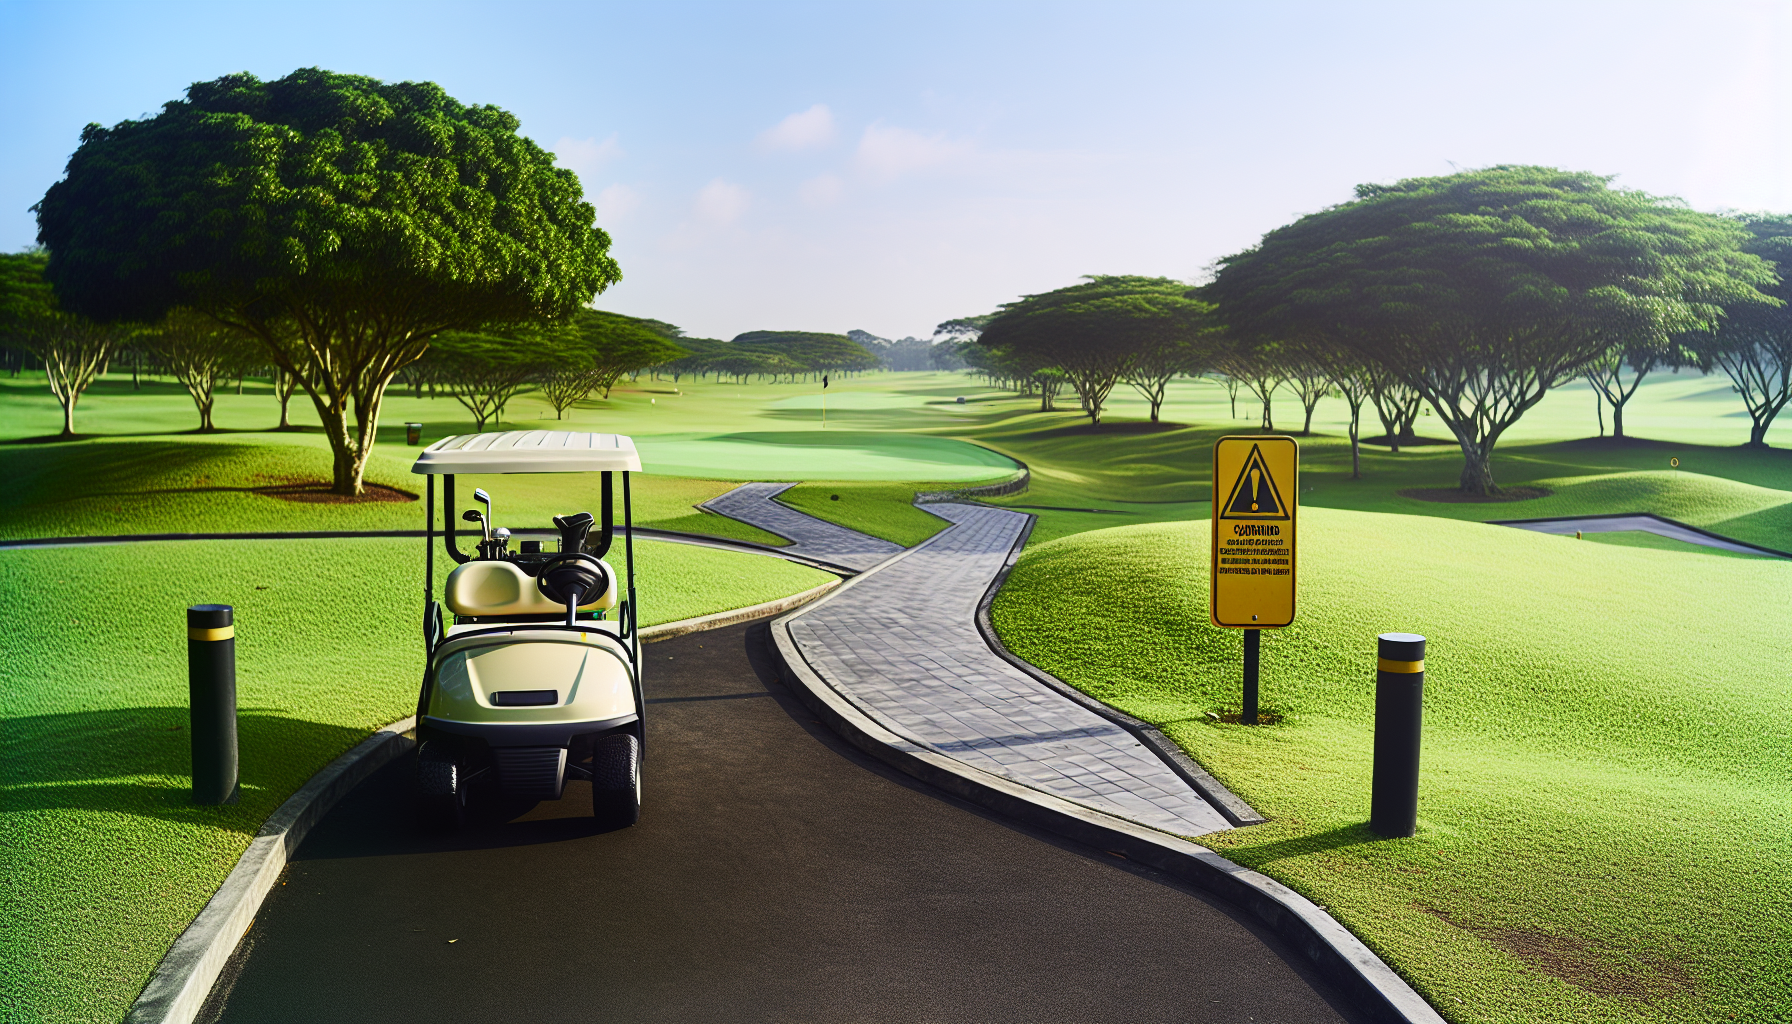 Common causes of golf cart accidents